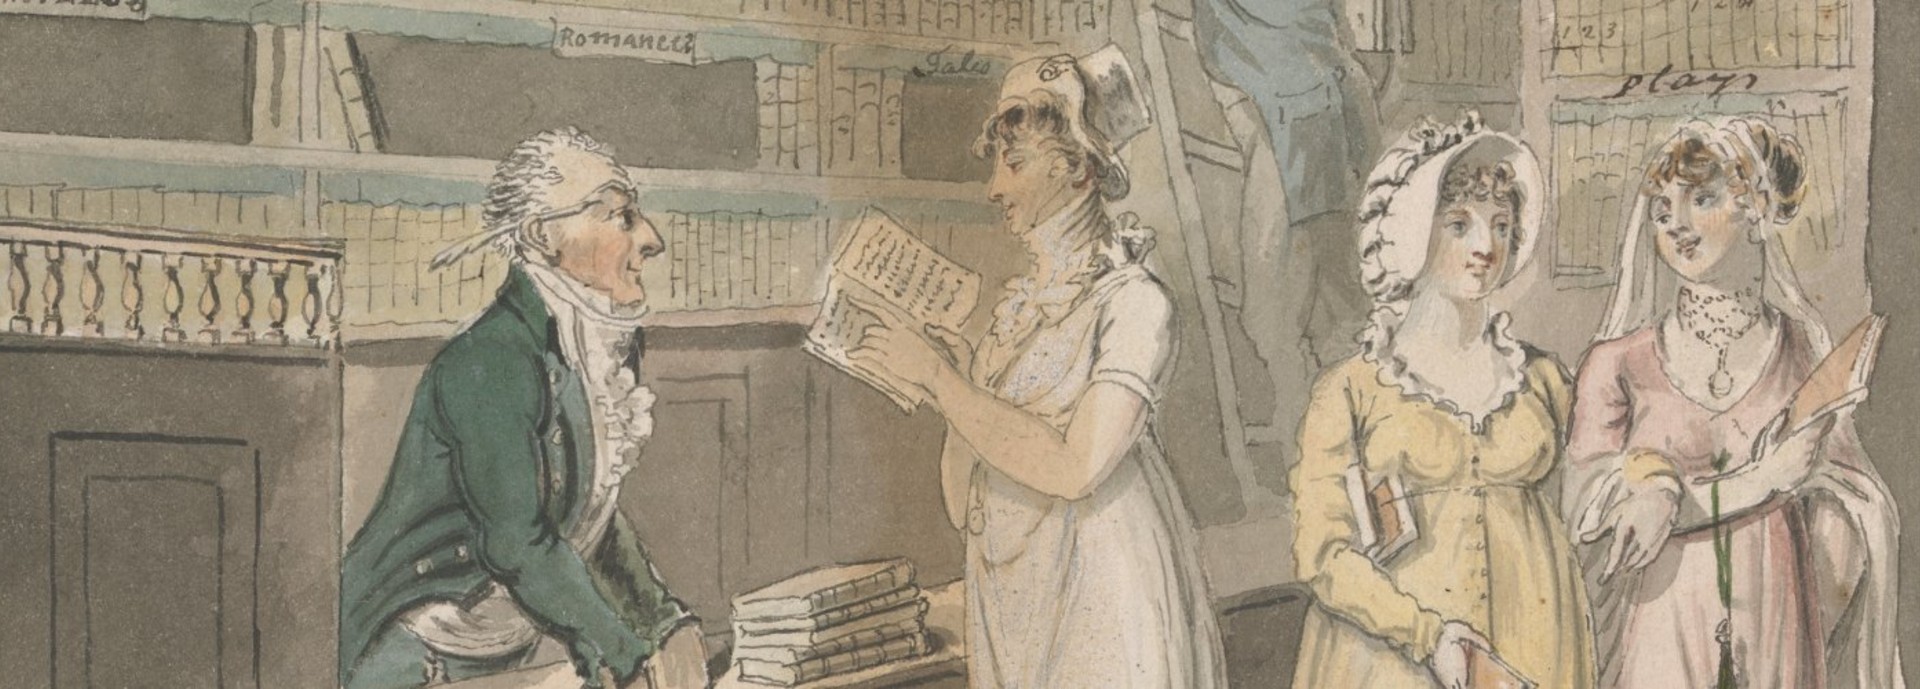 18th Century lady and gentleman reading books in a library